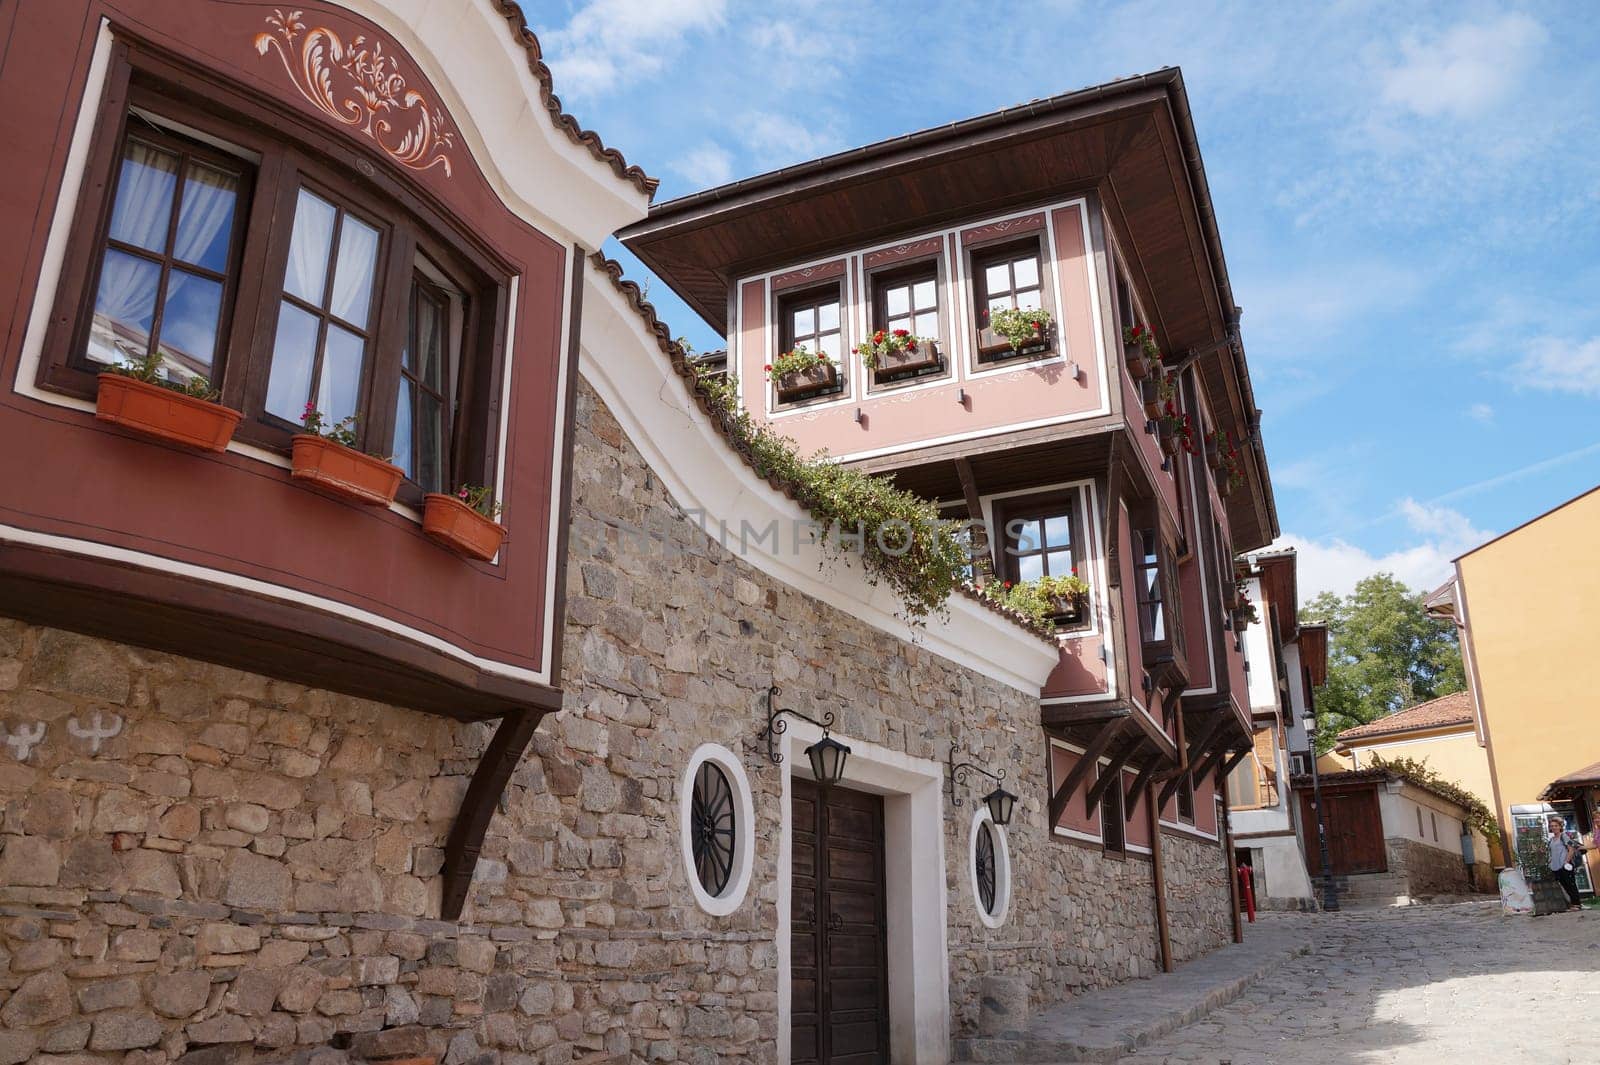 ancient facades in the old town of Plovdiv Bulgaria.